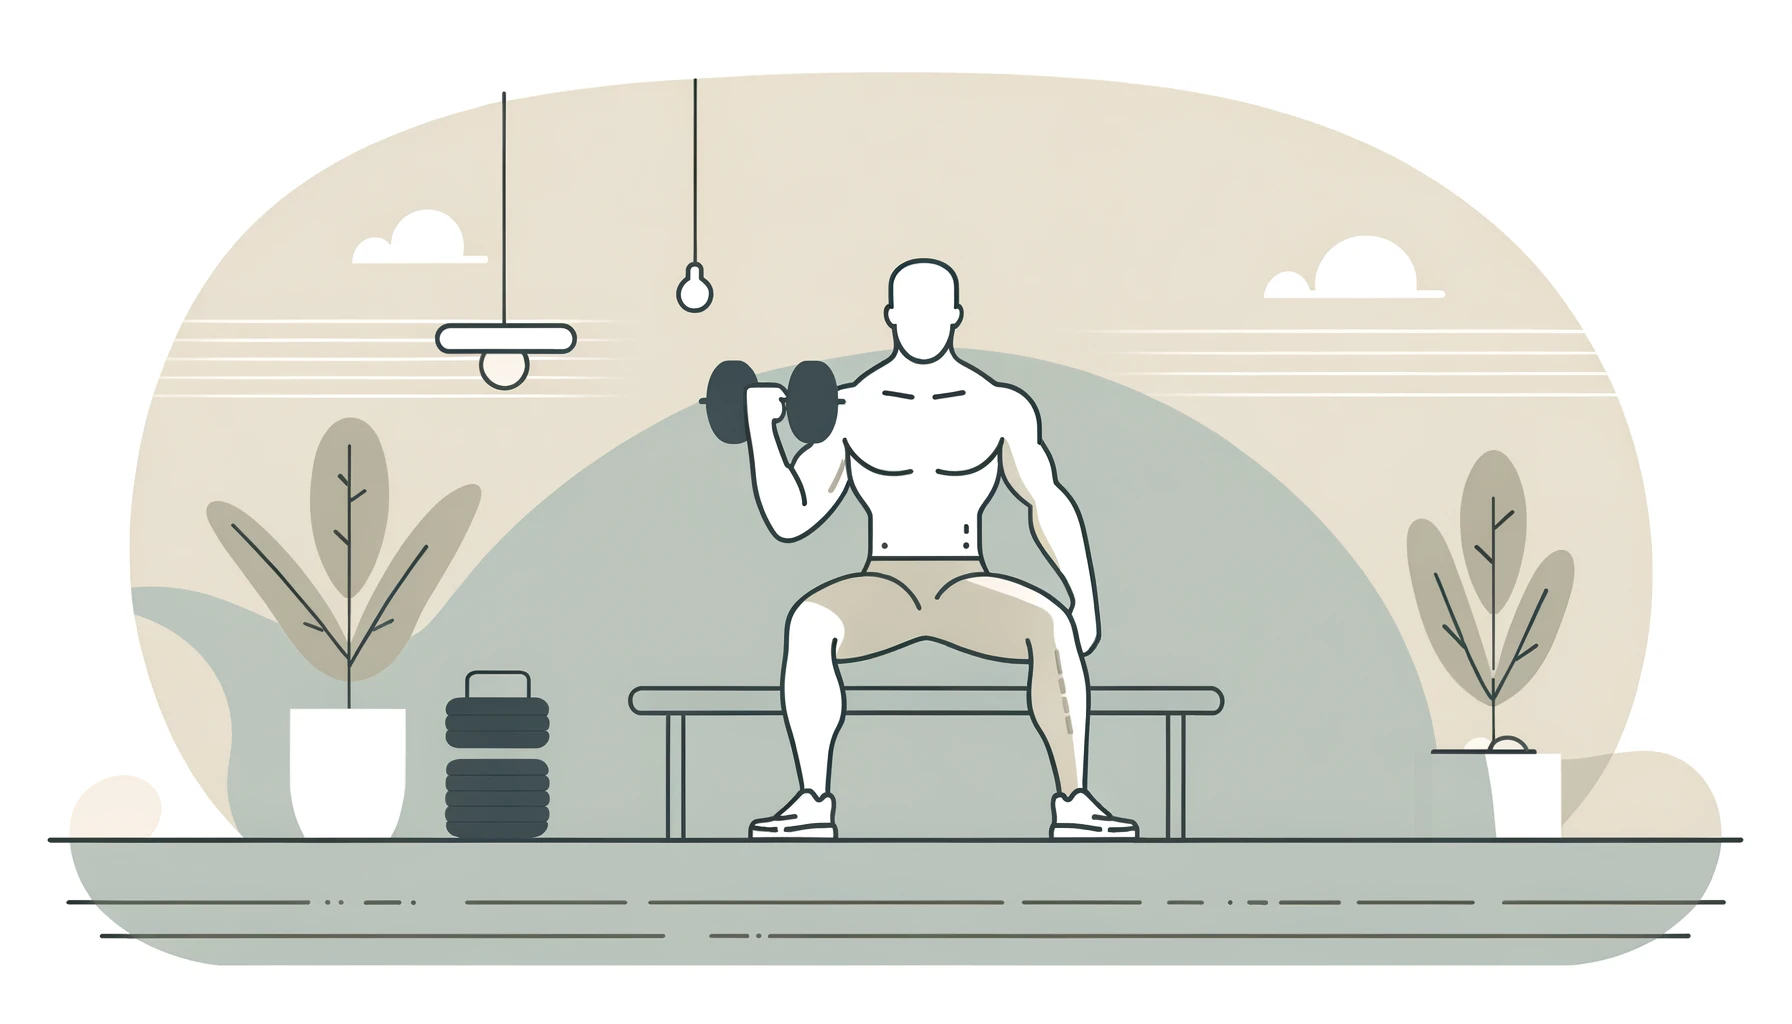 A simple, wide illustration suitable for a blog header, depicting the concept of 'Basic Strength Training'. The image should feature a person of ambiguous gender, with a medium build, performing a basic dumbbell exercise. The setting is a gym, with minimalistic details and light colors to keep the focus on the exercise. This illustration should visually represent the foundational aspects of strength training in a clear and straightforward manner.